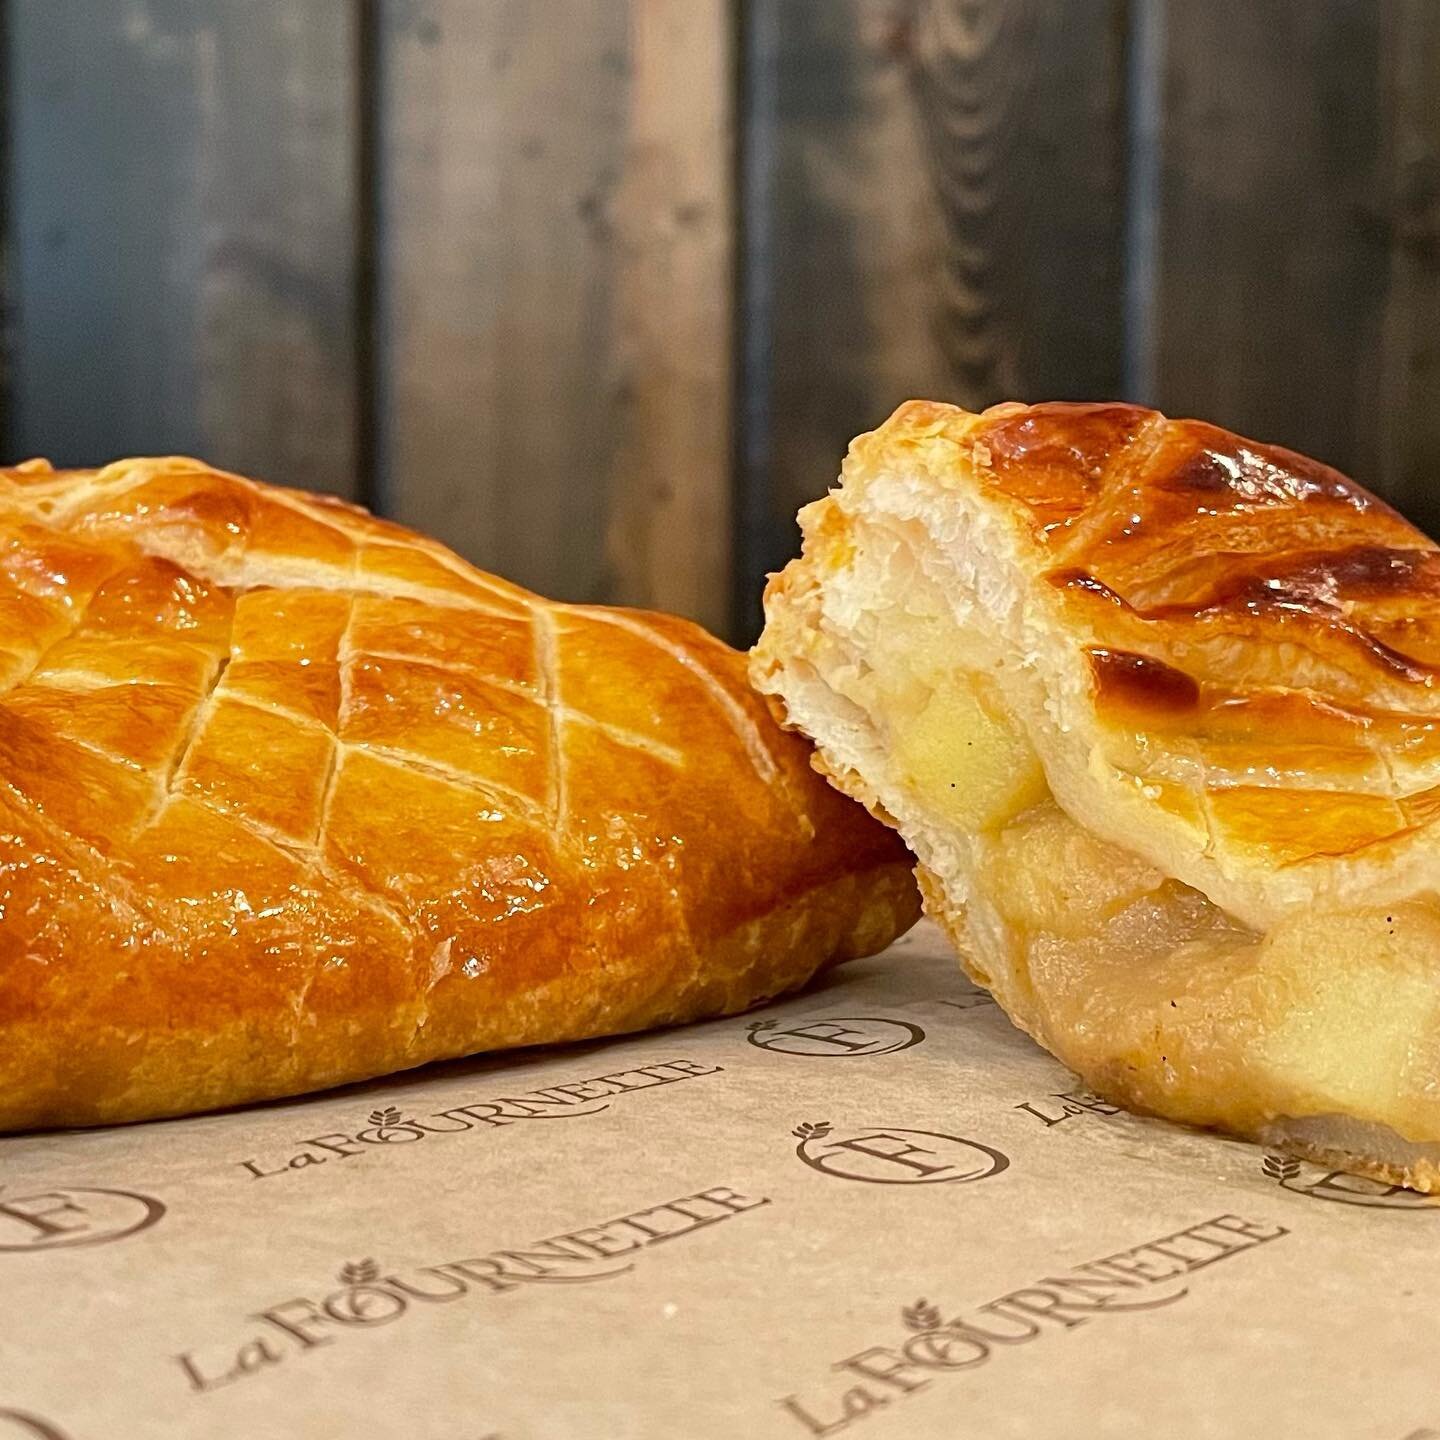 Le chausson aux pommes, or apple turnover! Made with puff pastry dough and a &lsquo;Reinette/Granny Smith&rsquo; apple compote filling, it is the latest addition to our pastry selection. Available starting now!